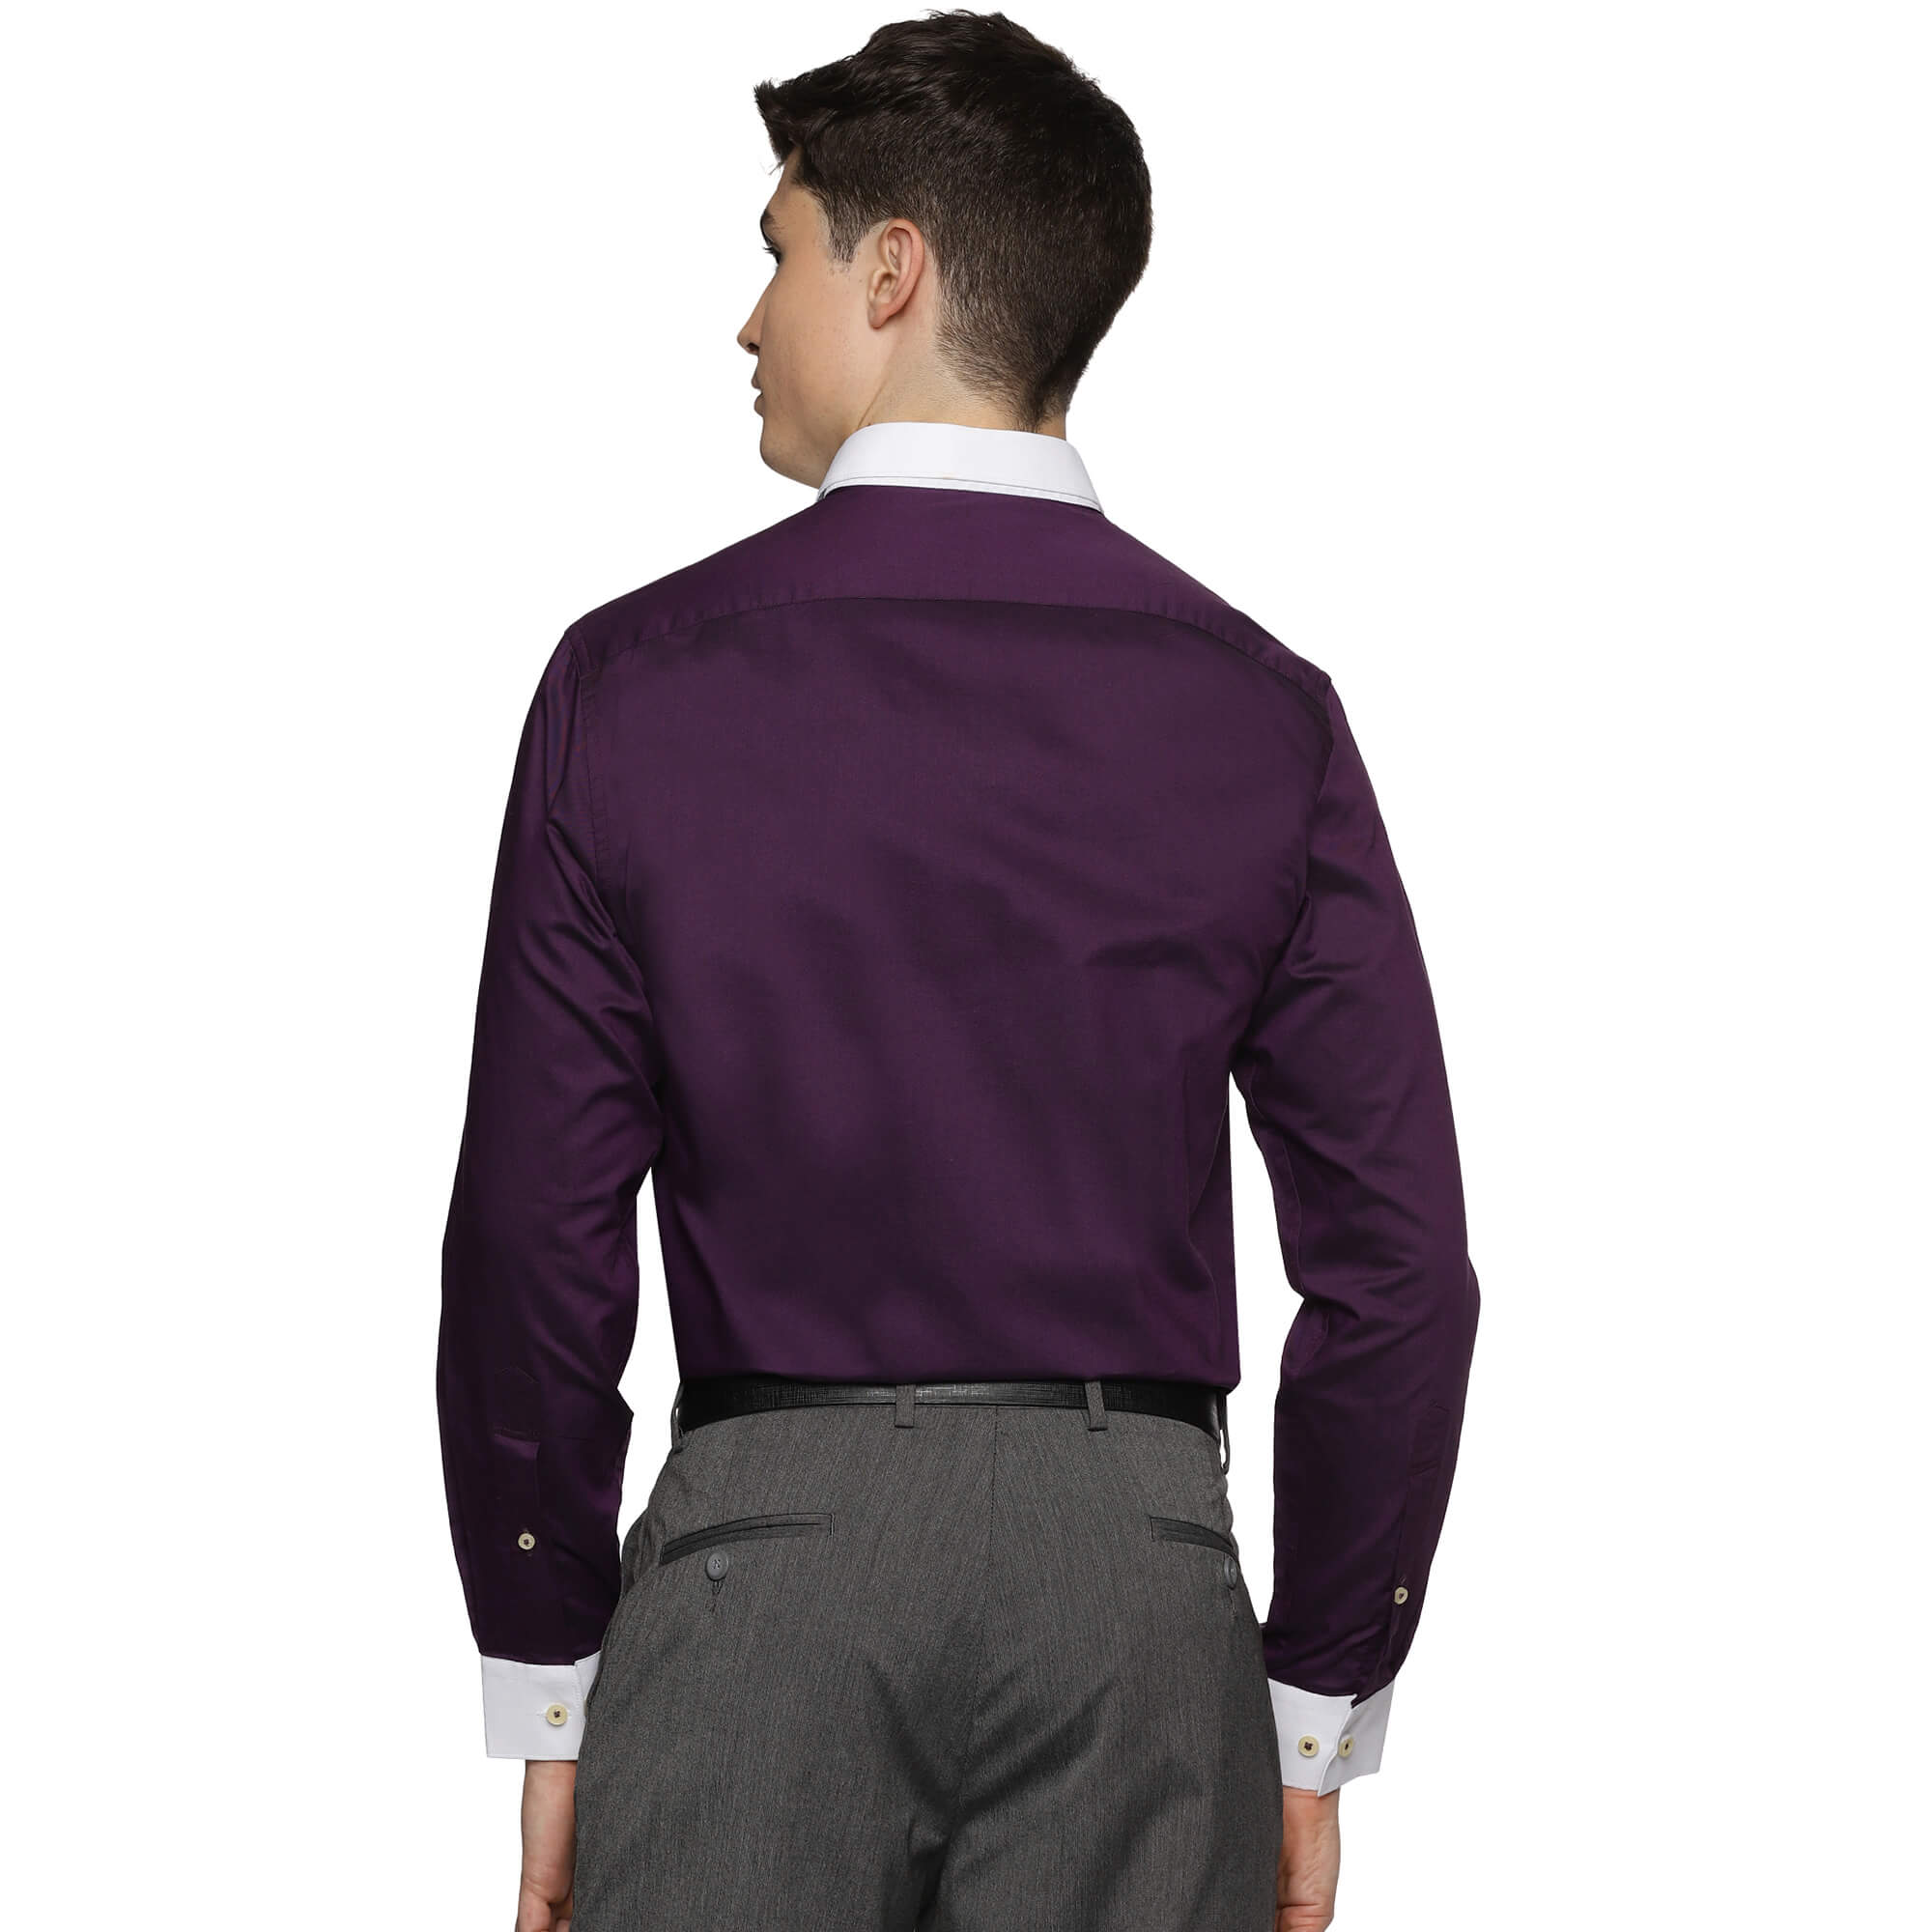 White Collar Solid Shirt In Purple - The Formal Club